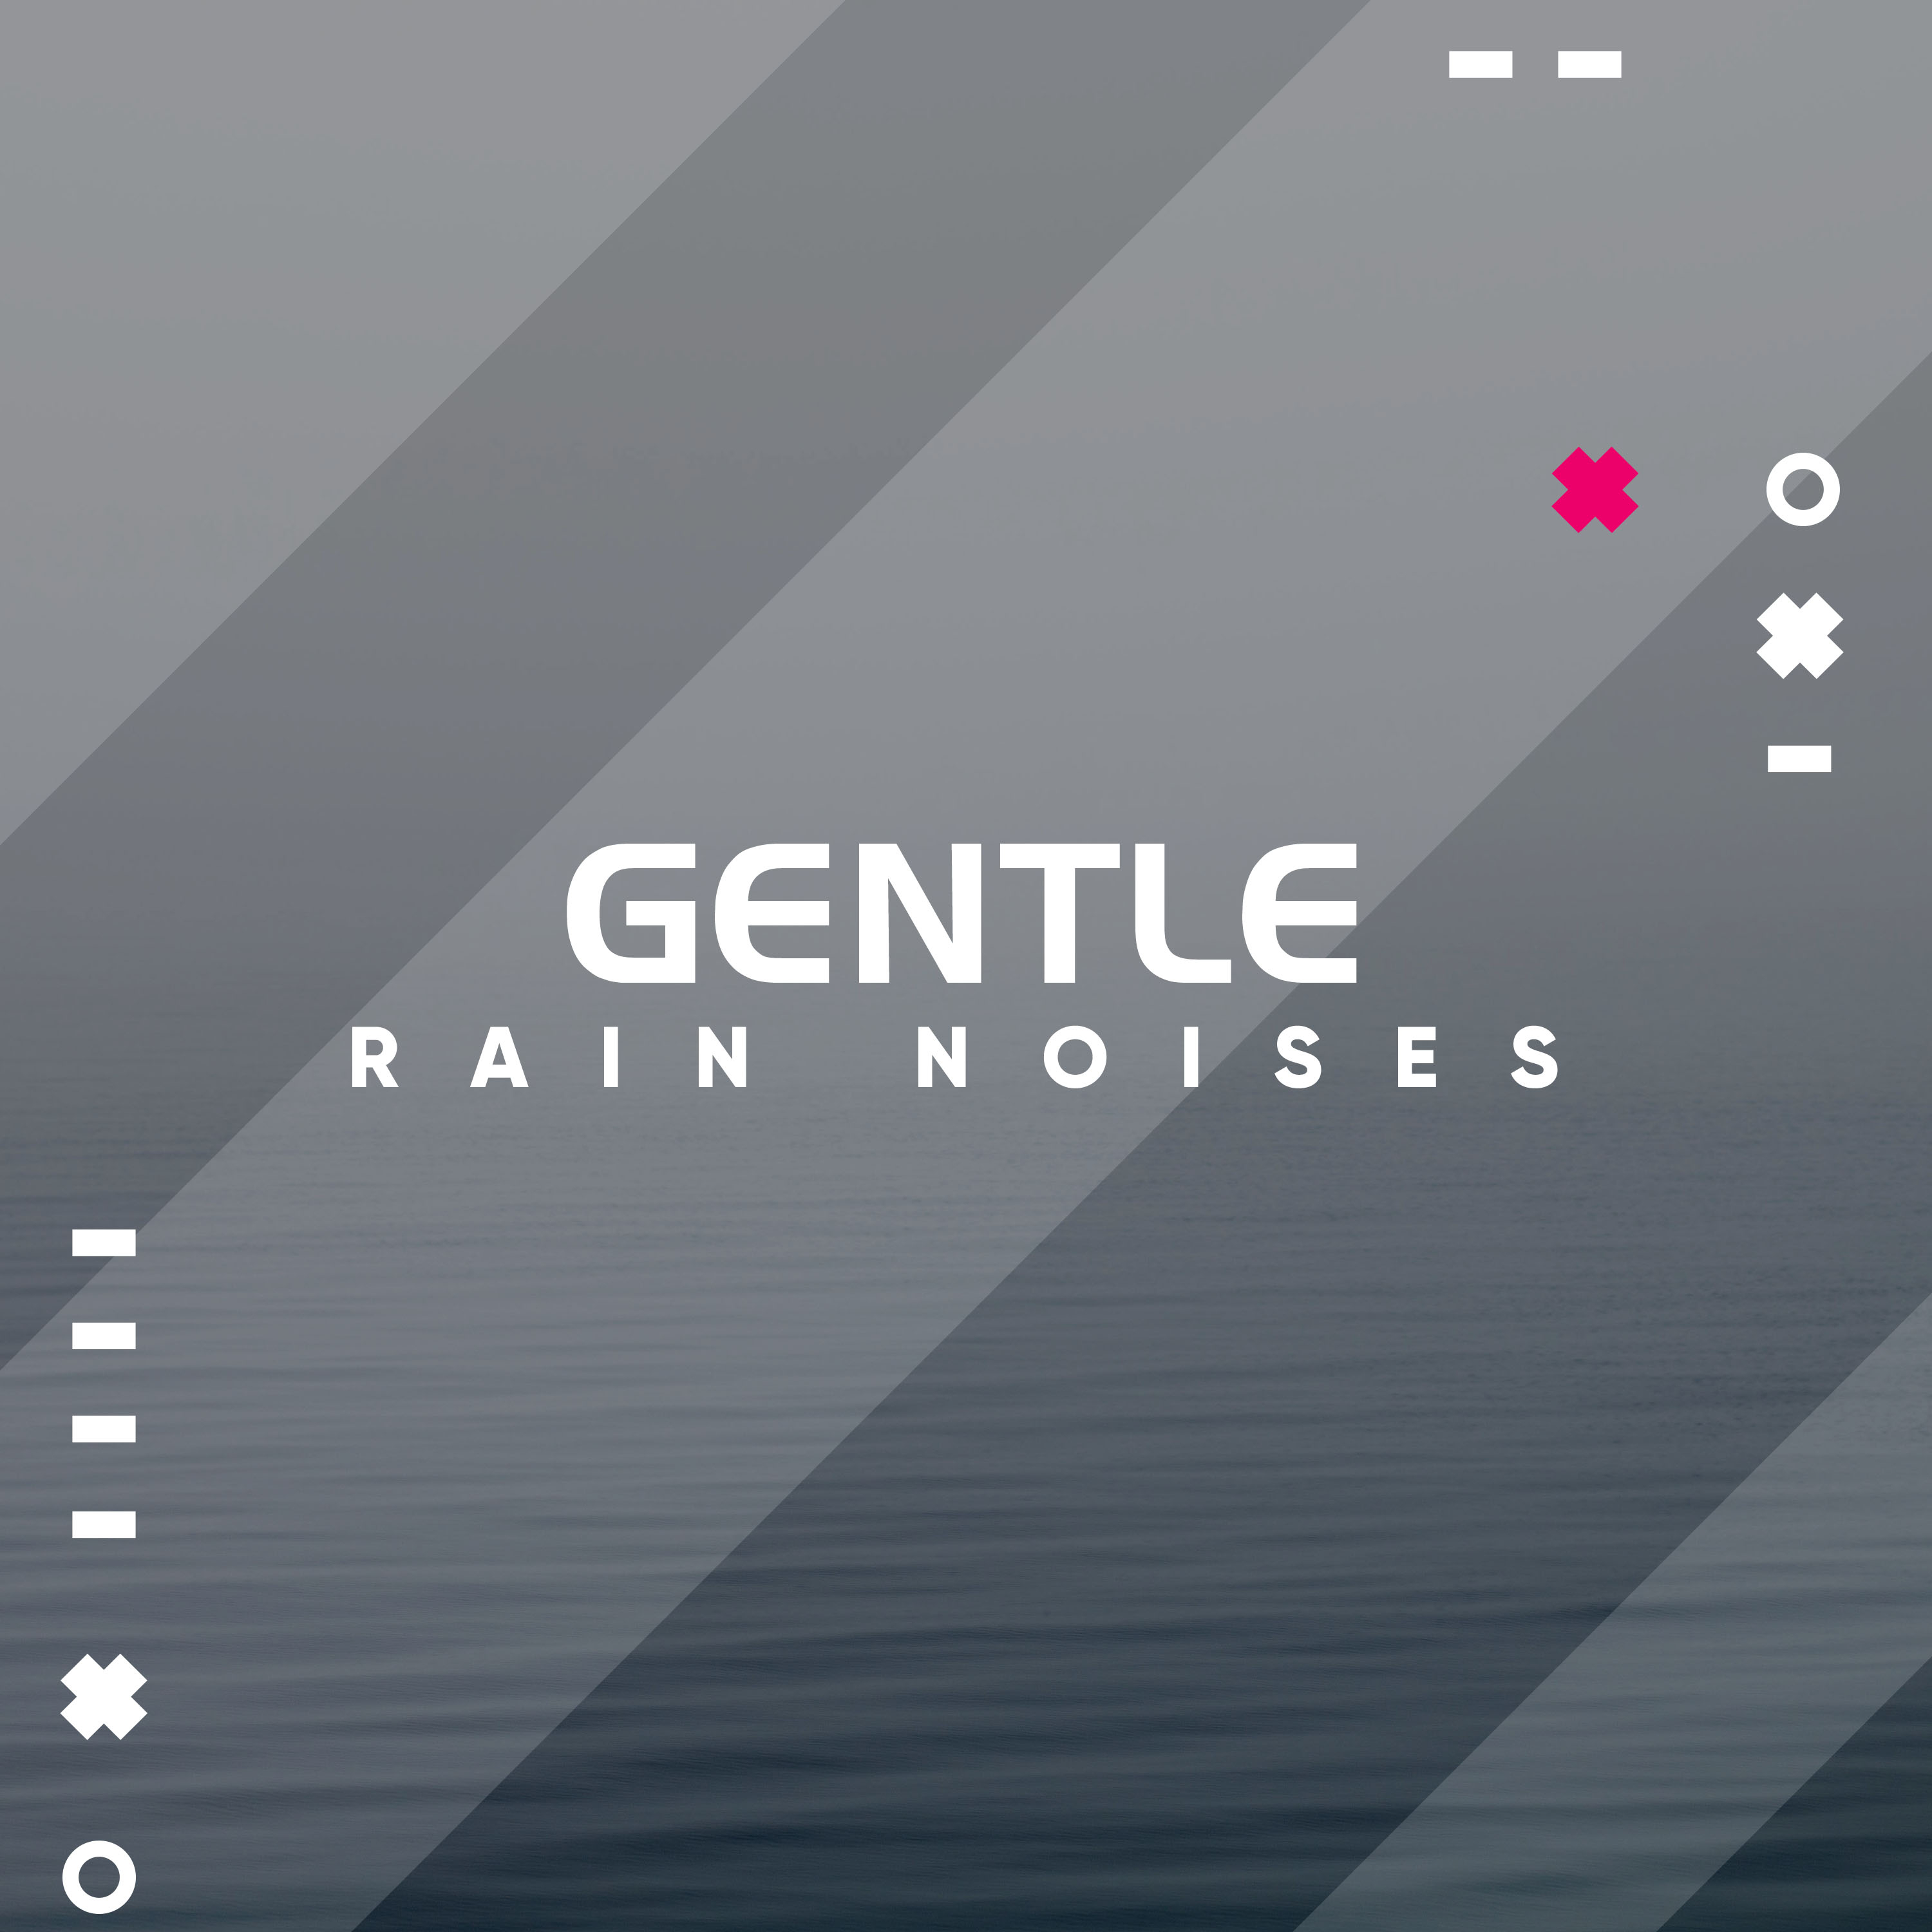 #20 Gentle Rain Noises for Spa Relaxation